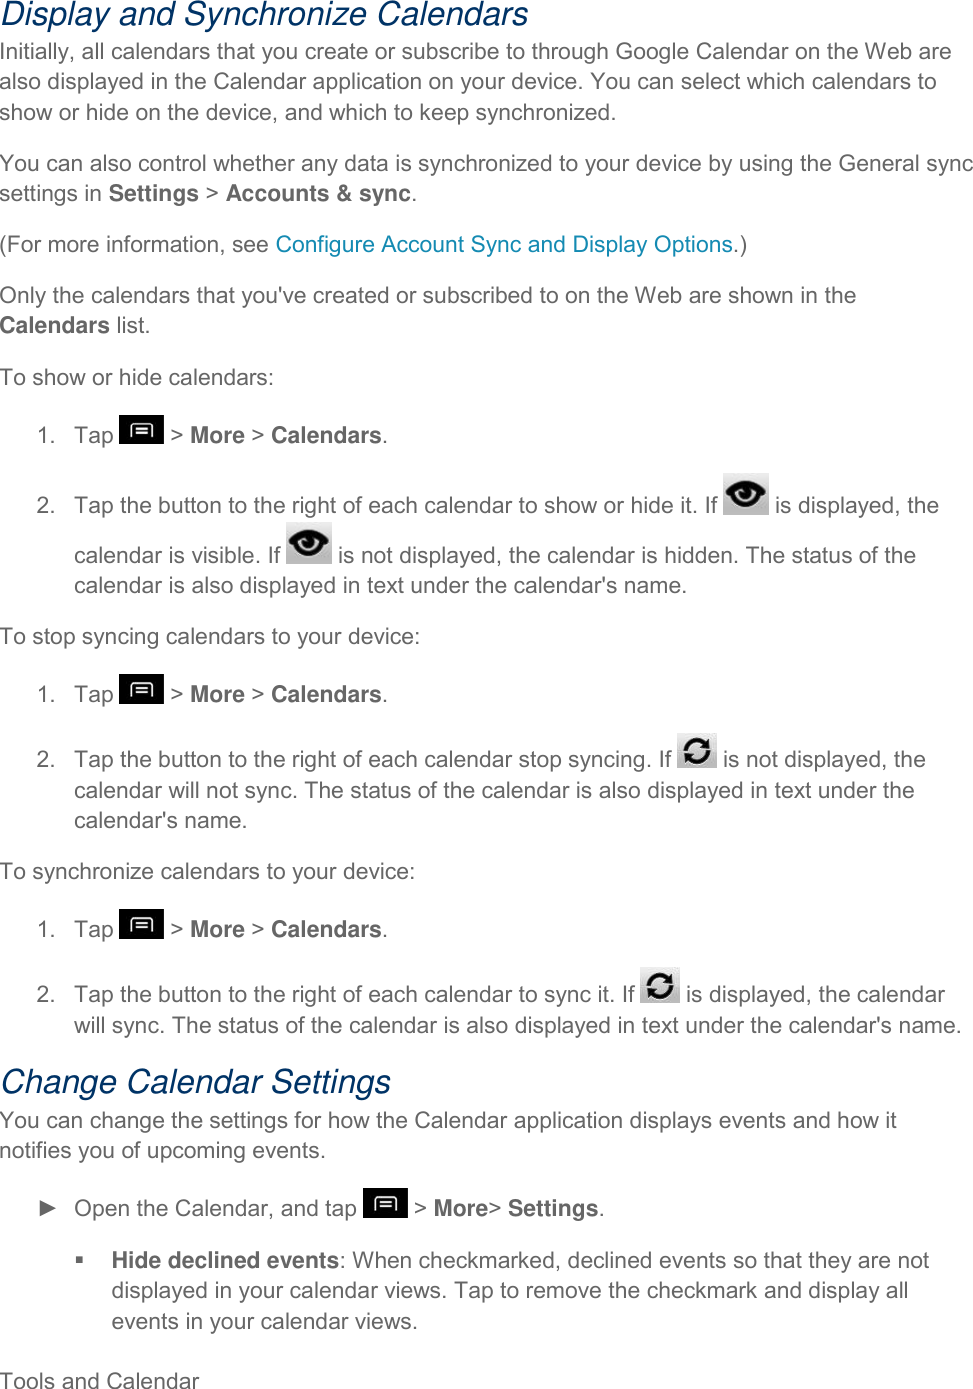  Tools and Calendar     Display and Synchronize Calendars Initially, all calendars that you create or subscribe to through Google Calendar on the Web are also displayed in the Calendar application on your device. You can select which calendars to show or hide on the device, and which to keep synchronized. You can also control whether any data is synchronized to your device by using the General sync settings in Settings &gt; Accounts &amp; sync. (For more information, see Configure Account Sync and Display Options.) Only the calendars that you&apos;ve created or subscribed to on the Web are shown in the Calendars list. To show or hide calendars: 1.  Tap   &gt; More &gt; Calendars. 2.  Tap the button to the right of each calendar to show or hide it. If   is displayed, the calendar is visible. If   is not displayed, the calendar is hidden. The status of the calendar is also displayed in text under the calendar&apos;s name. To stop syncing calendars to your device: 1.  Tap   &gt; More &gt; Calendars. 2.  Tap the button to the right of each calendar stop syncing. If   is not displayed, the calendar will not sync. The status of the calendar is also displayed in text under the calendar&apos;s name. To synchronize calendars to your device: 1.  Tap   &gt; More &gt; Calendars. 2.  Tap the button to the right of each calendar to sync it. If   is displayed, the calendar will sync. The status of the calendar is also displayed in text under the calendar&apos;s name. Change Calendar Settings You can change the settings for how the Calendar application displays events and how it notifies you of upcoming events. ►  Open the Calendar, and tap   &gt; More&gt; Settings.  Hide declined events: When checkmarked, declined events so that they are not displayed in your calendar views. Tap to remove the checkmark and display all events in your calendar views. 